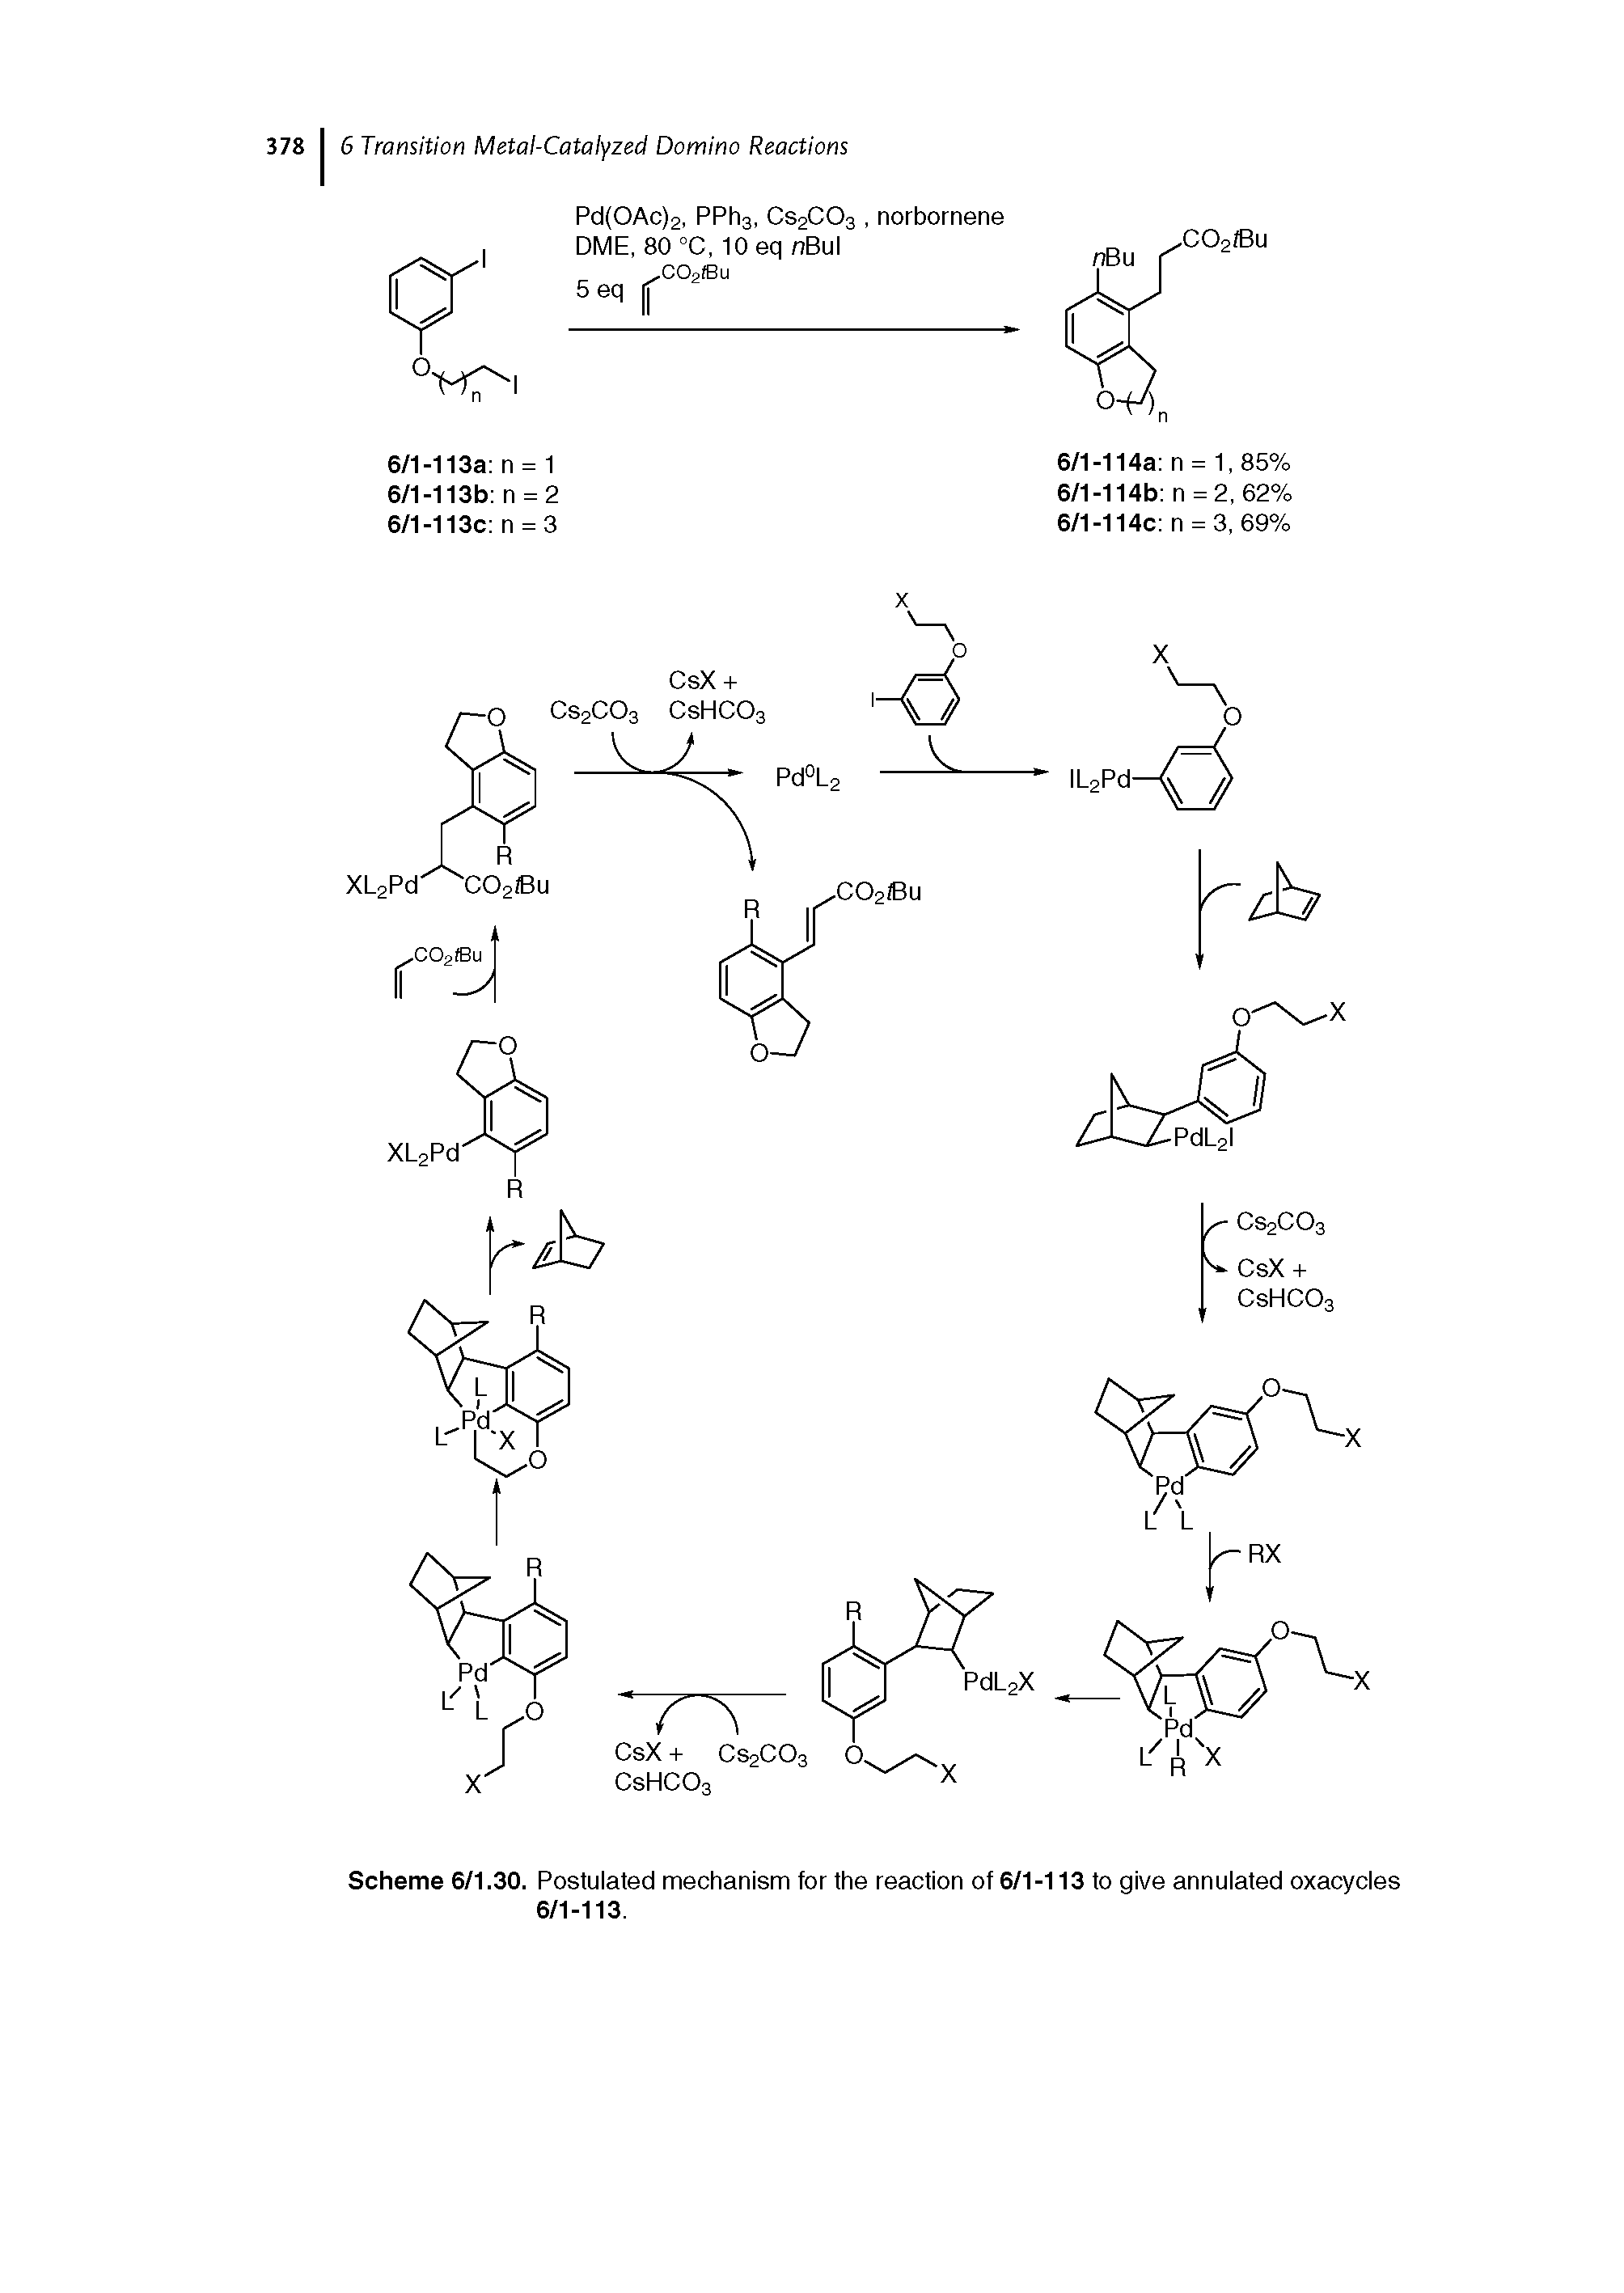 Scheme 6/1.30. Postulated mechanism for the reaction of 6/1-113 to give annulated oxacycles 6/1-113.